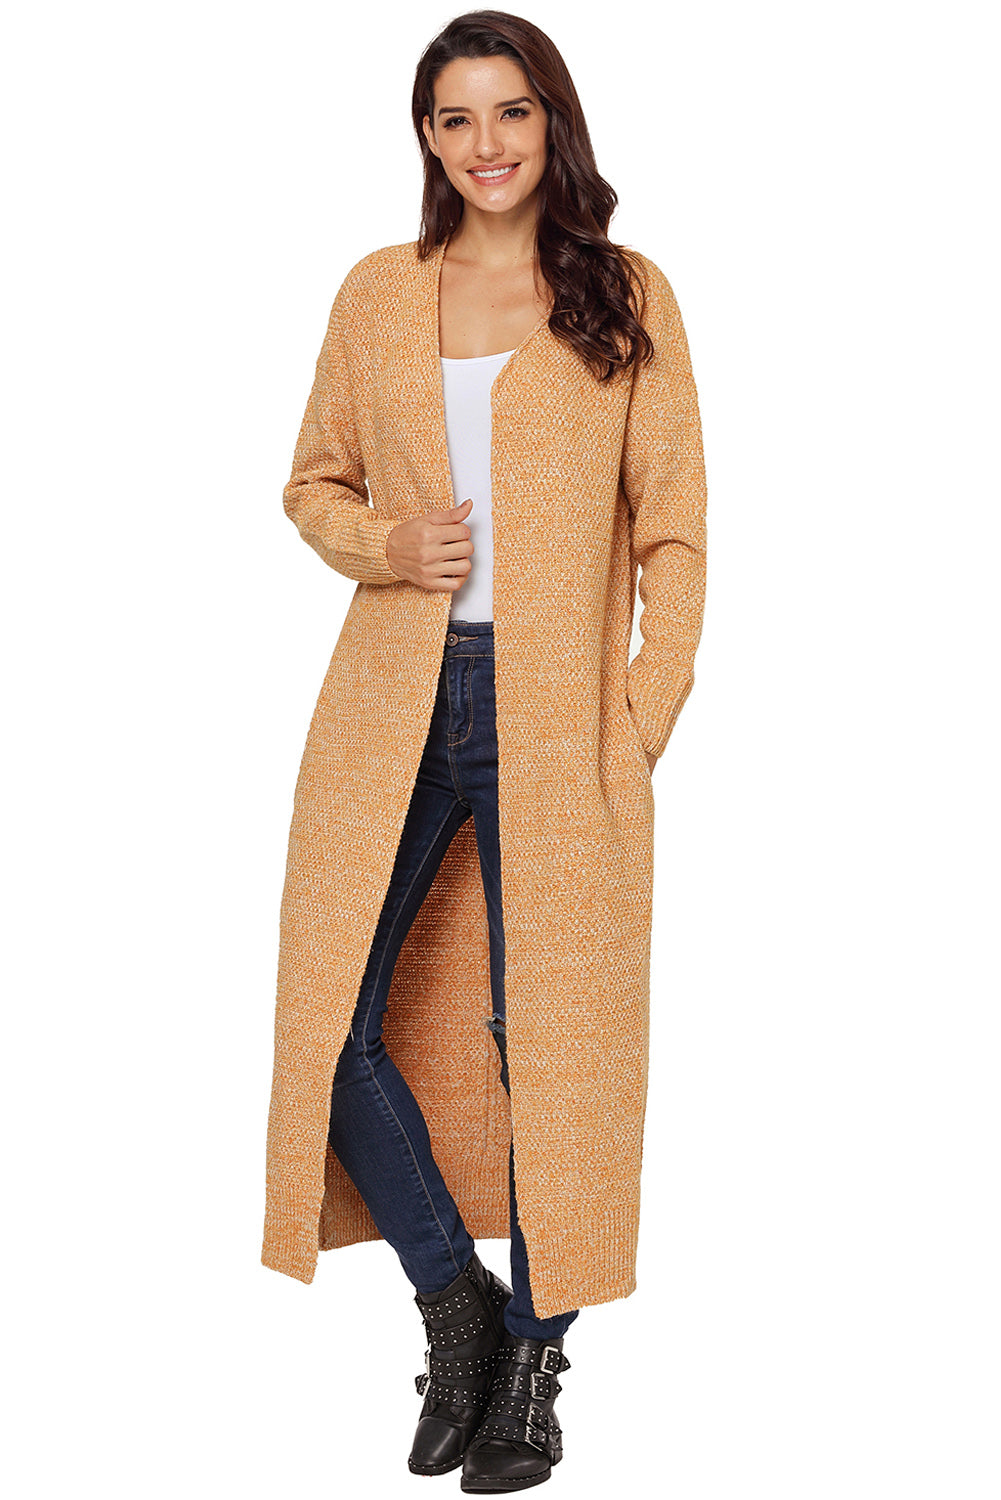 Women's Solid Color Cardigan Sweater Open Front Maxi Long Knit Coat